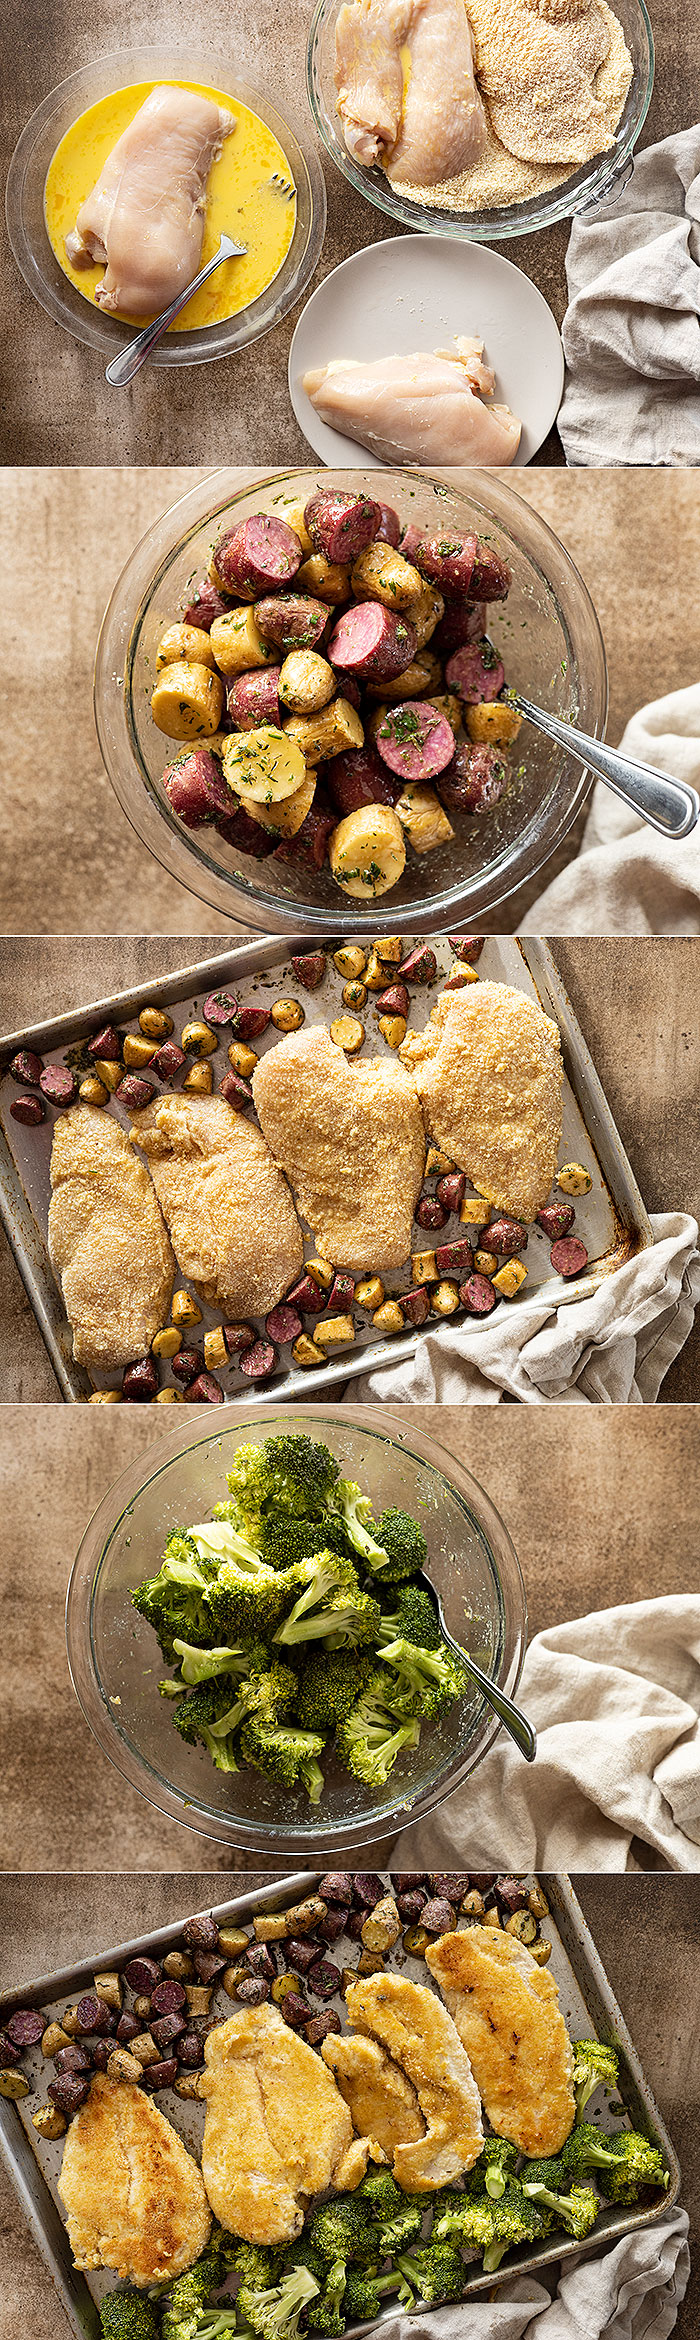 Five pictures showing how to make this chicken sheet pan dinner.